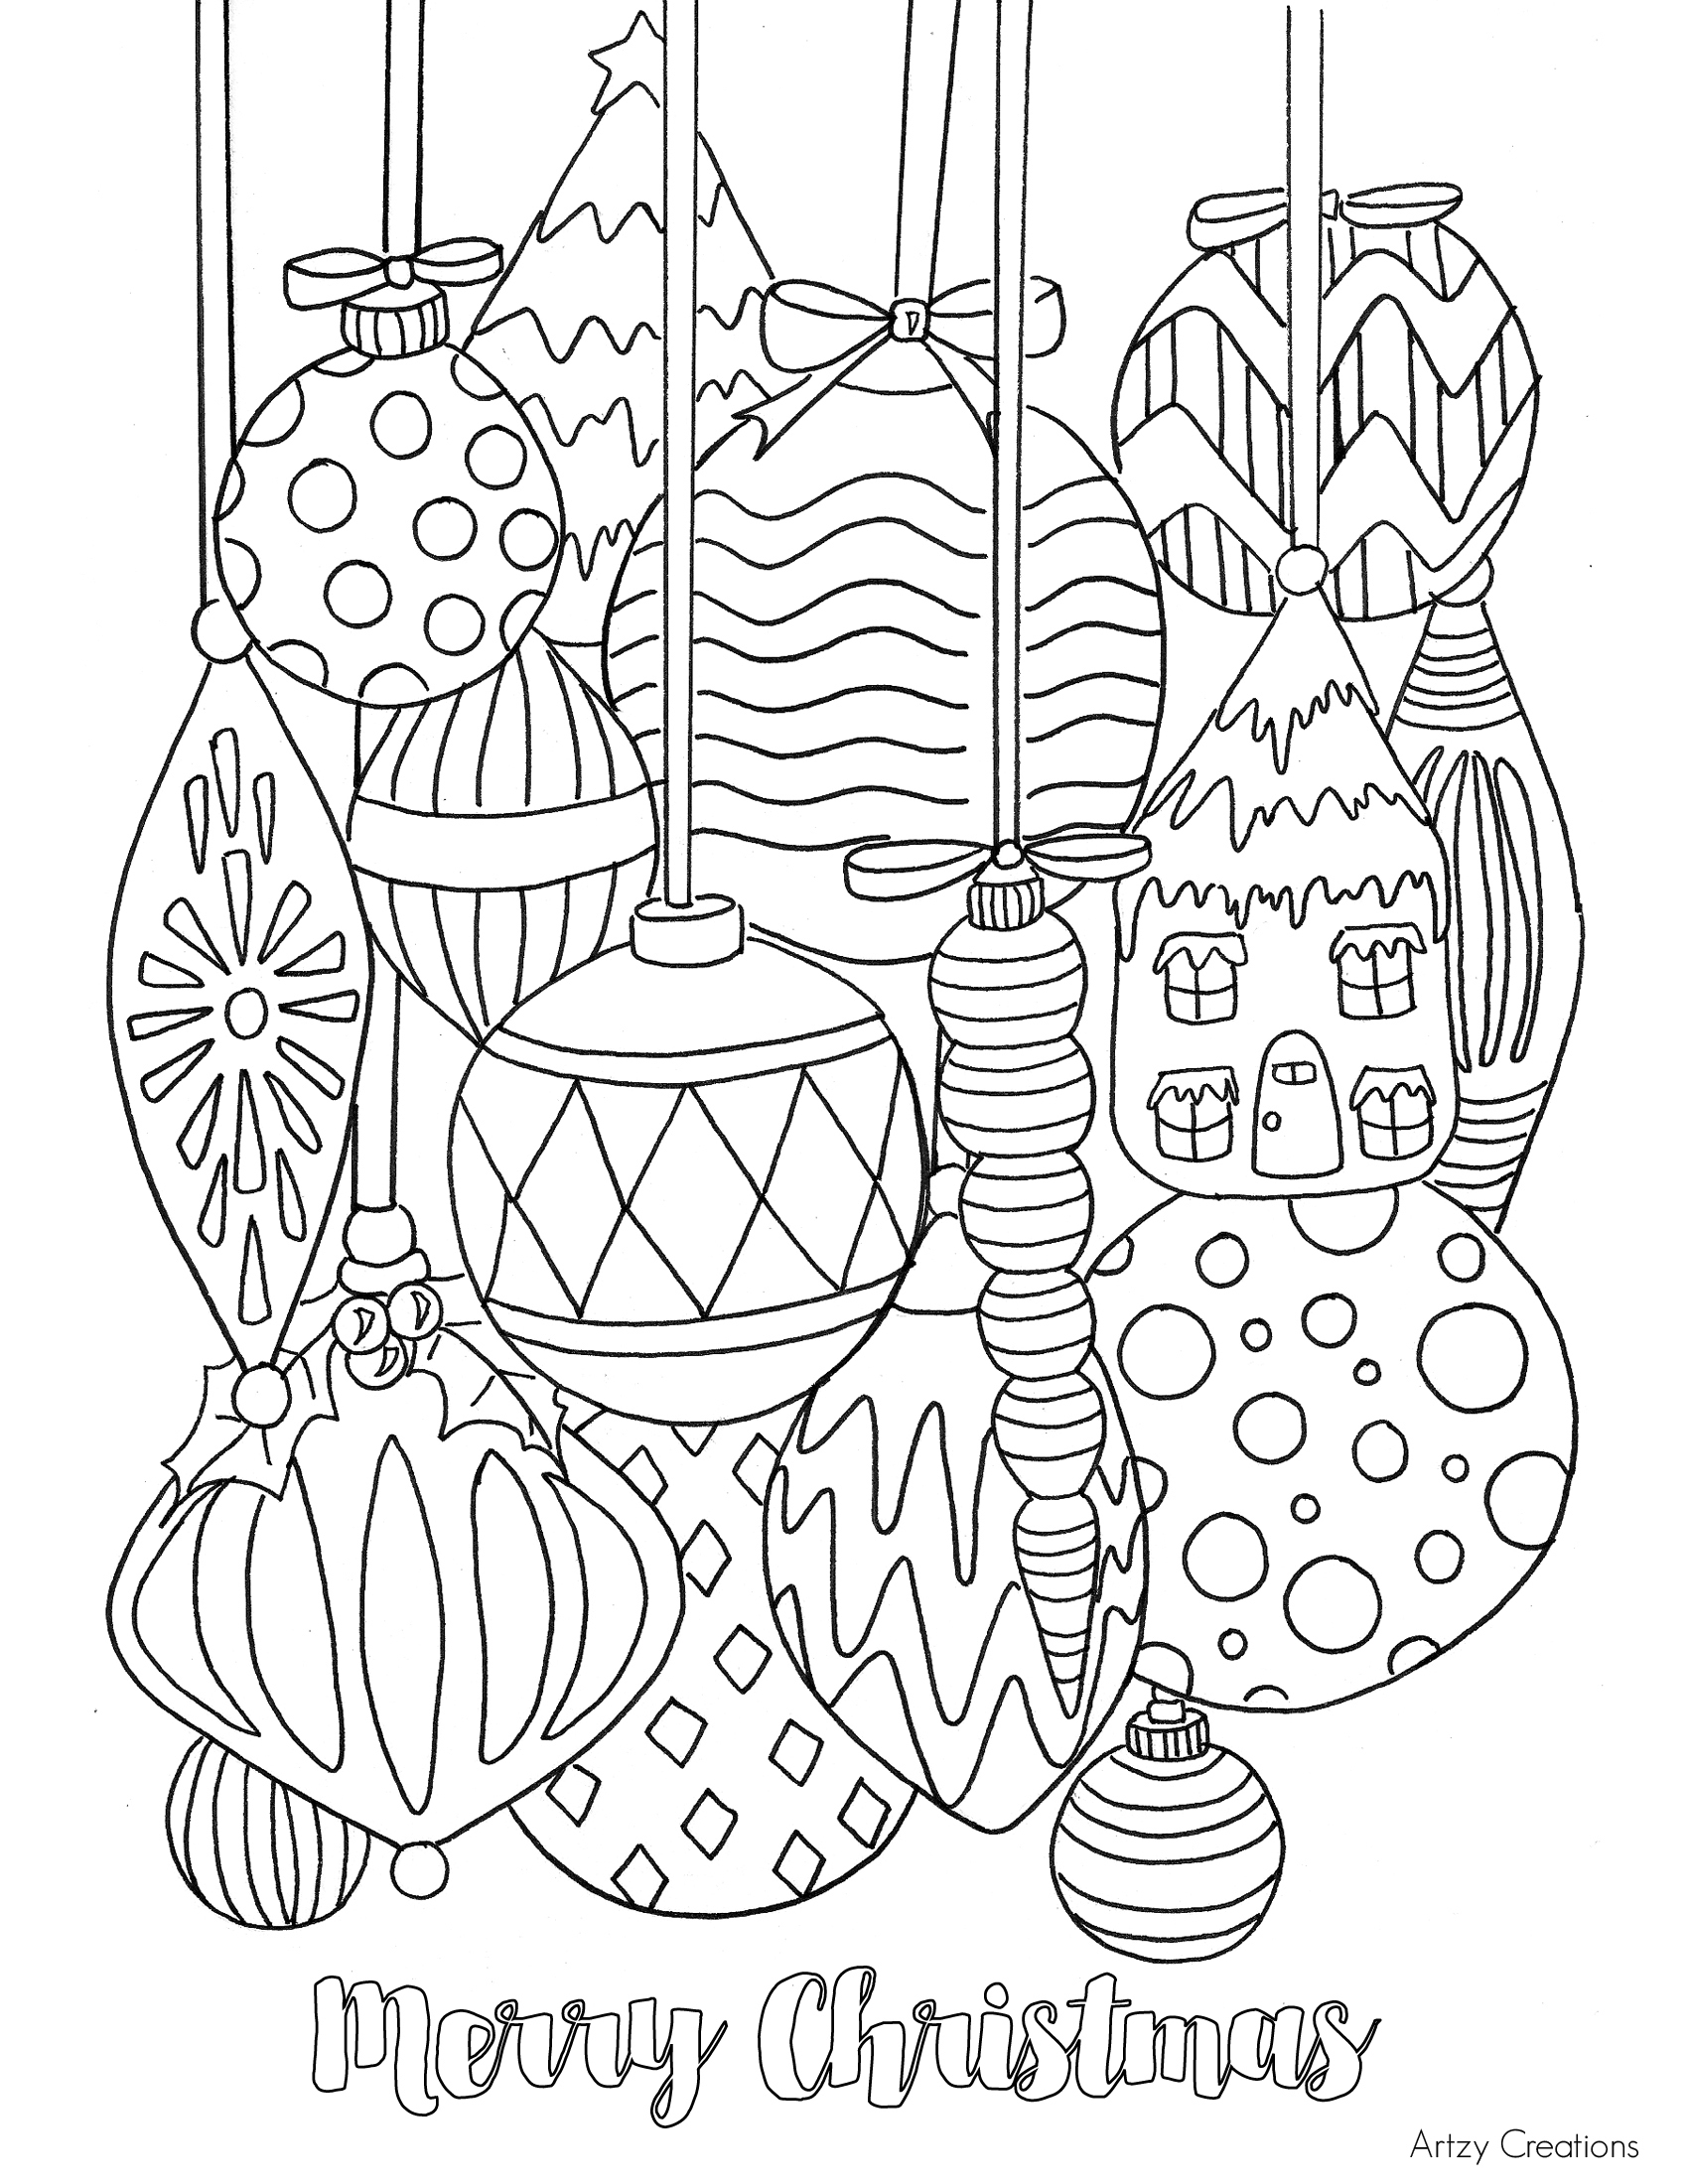 Coloring Pages ~ Christmasng Worksheets Pages Excelent Free - Free Printable Christmas Coloring Pages